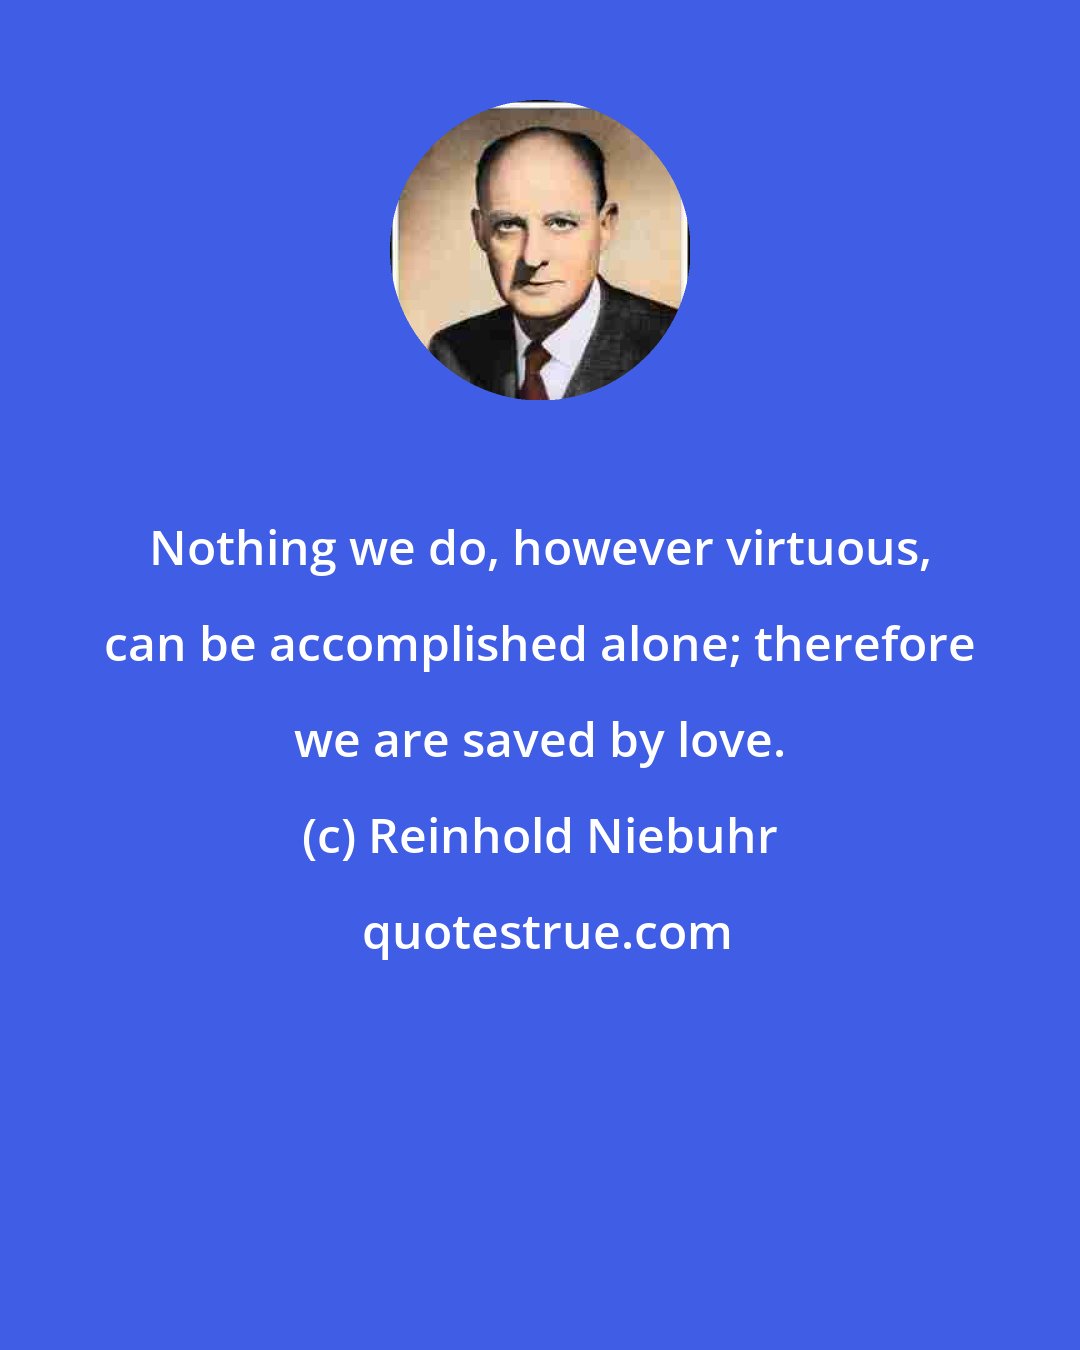 Reinhold Niebuhr: Nothing we do, however virtuous, can be accomplished alone; therefore we are saved by love.